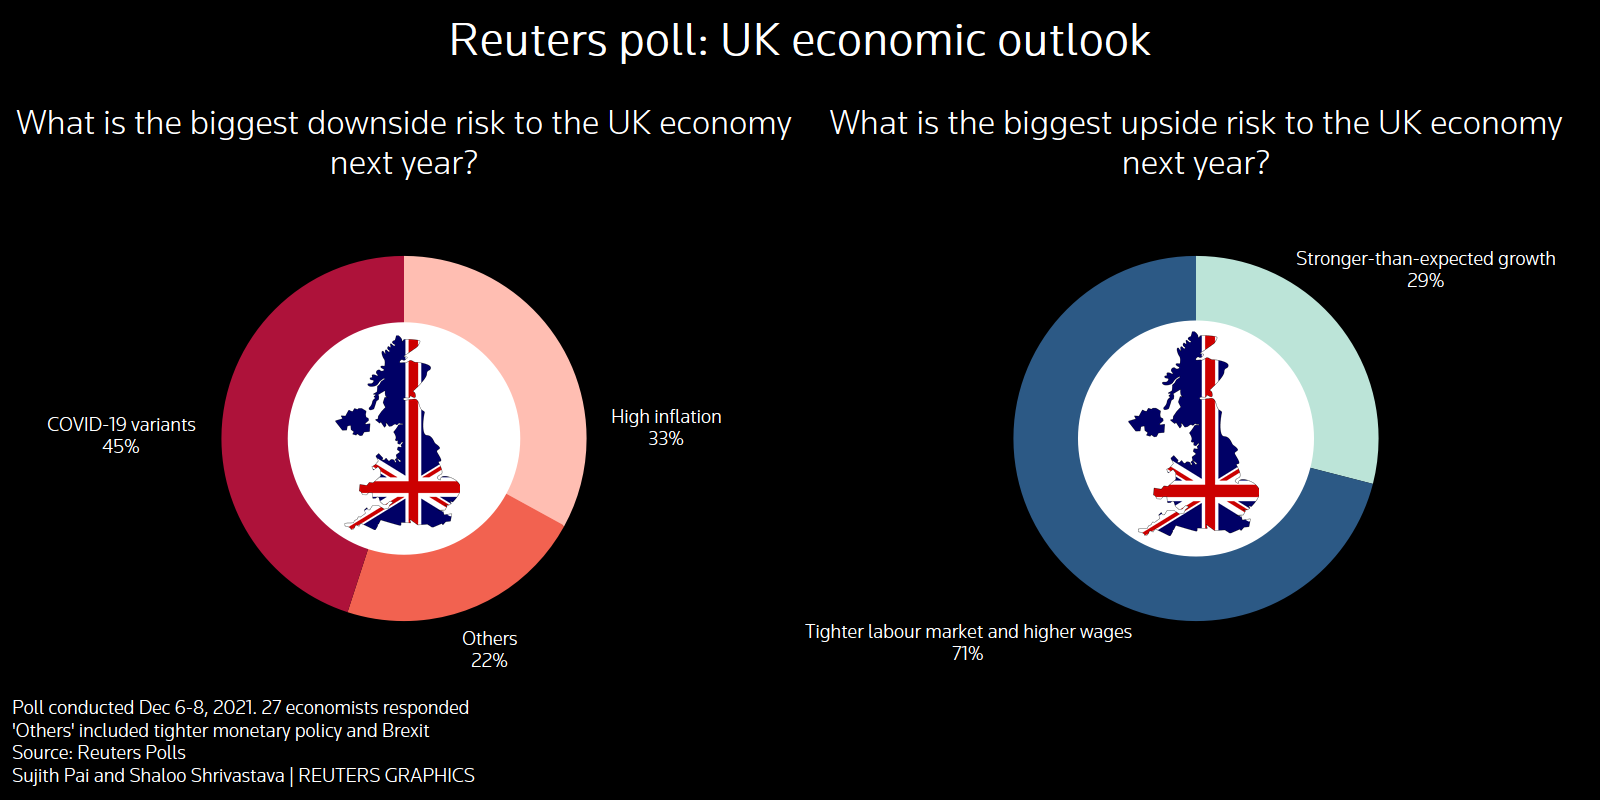 Reuters poll graphics on the UK economic outlook